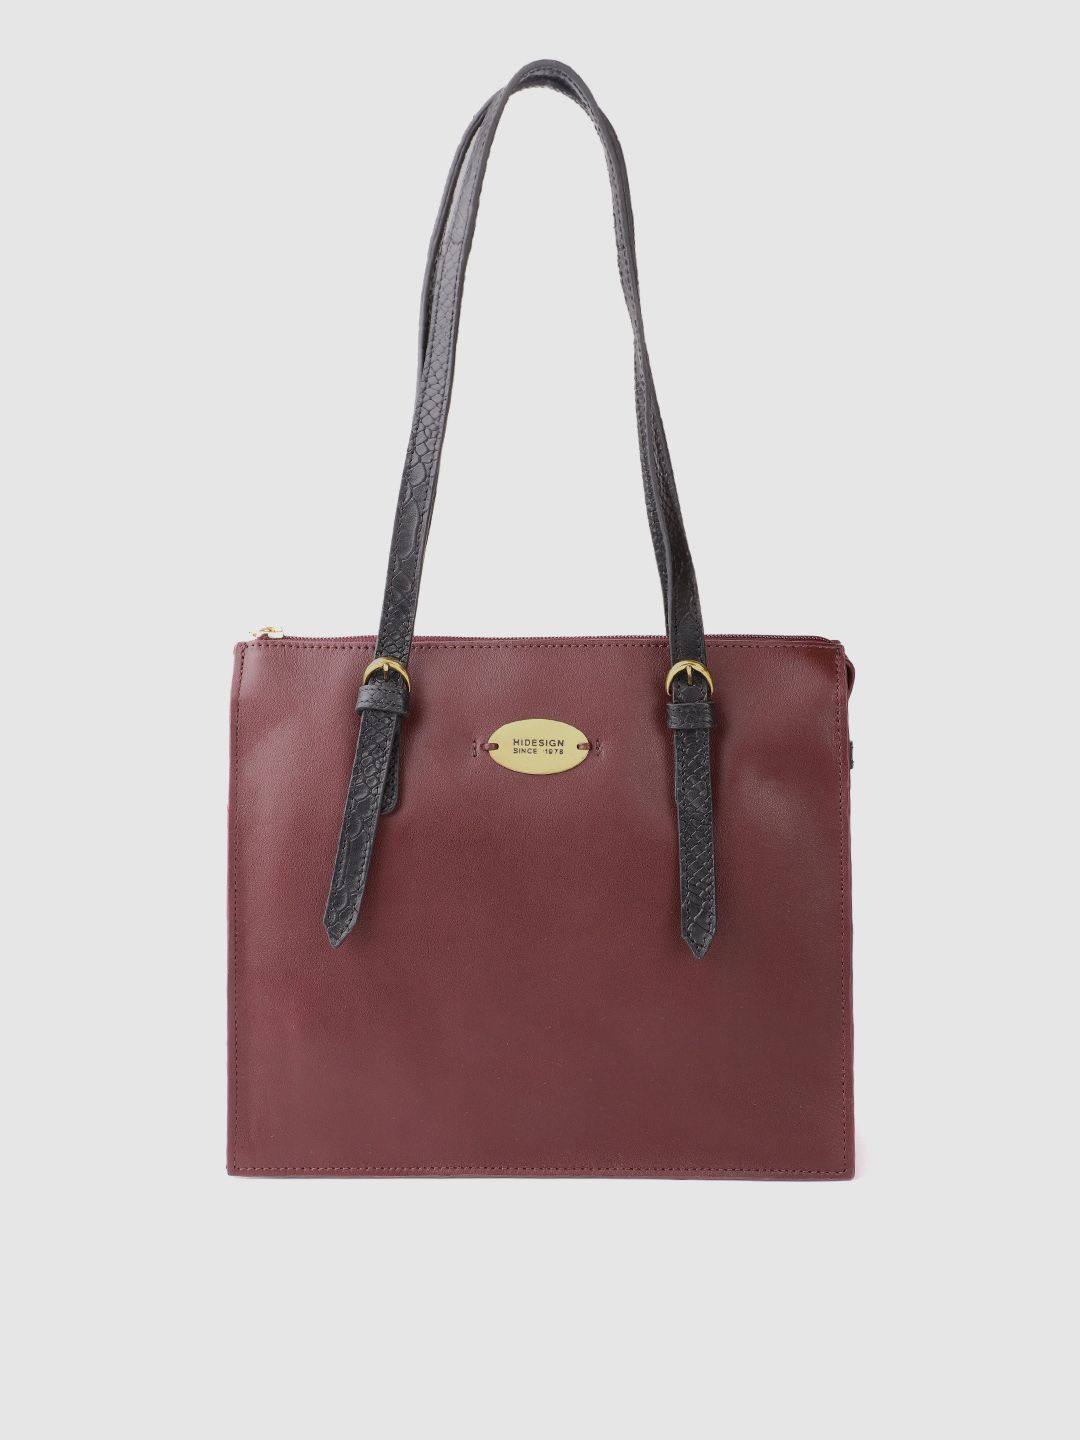 Hidesign Maroon & Black Handcrafted Leather Structured Shoulder Bag Price in India